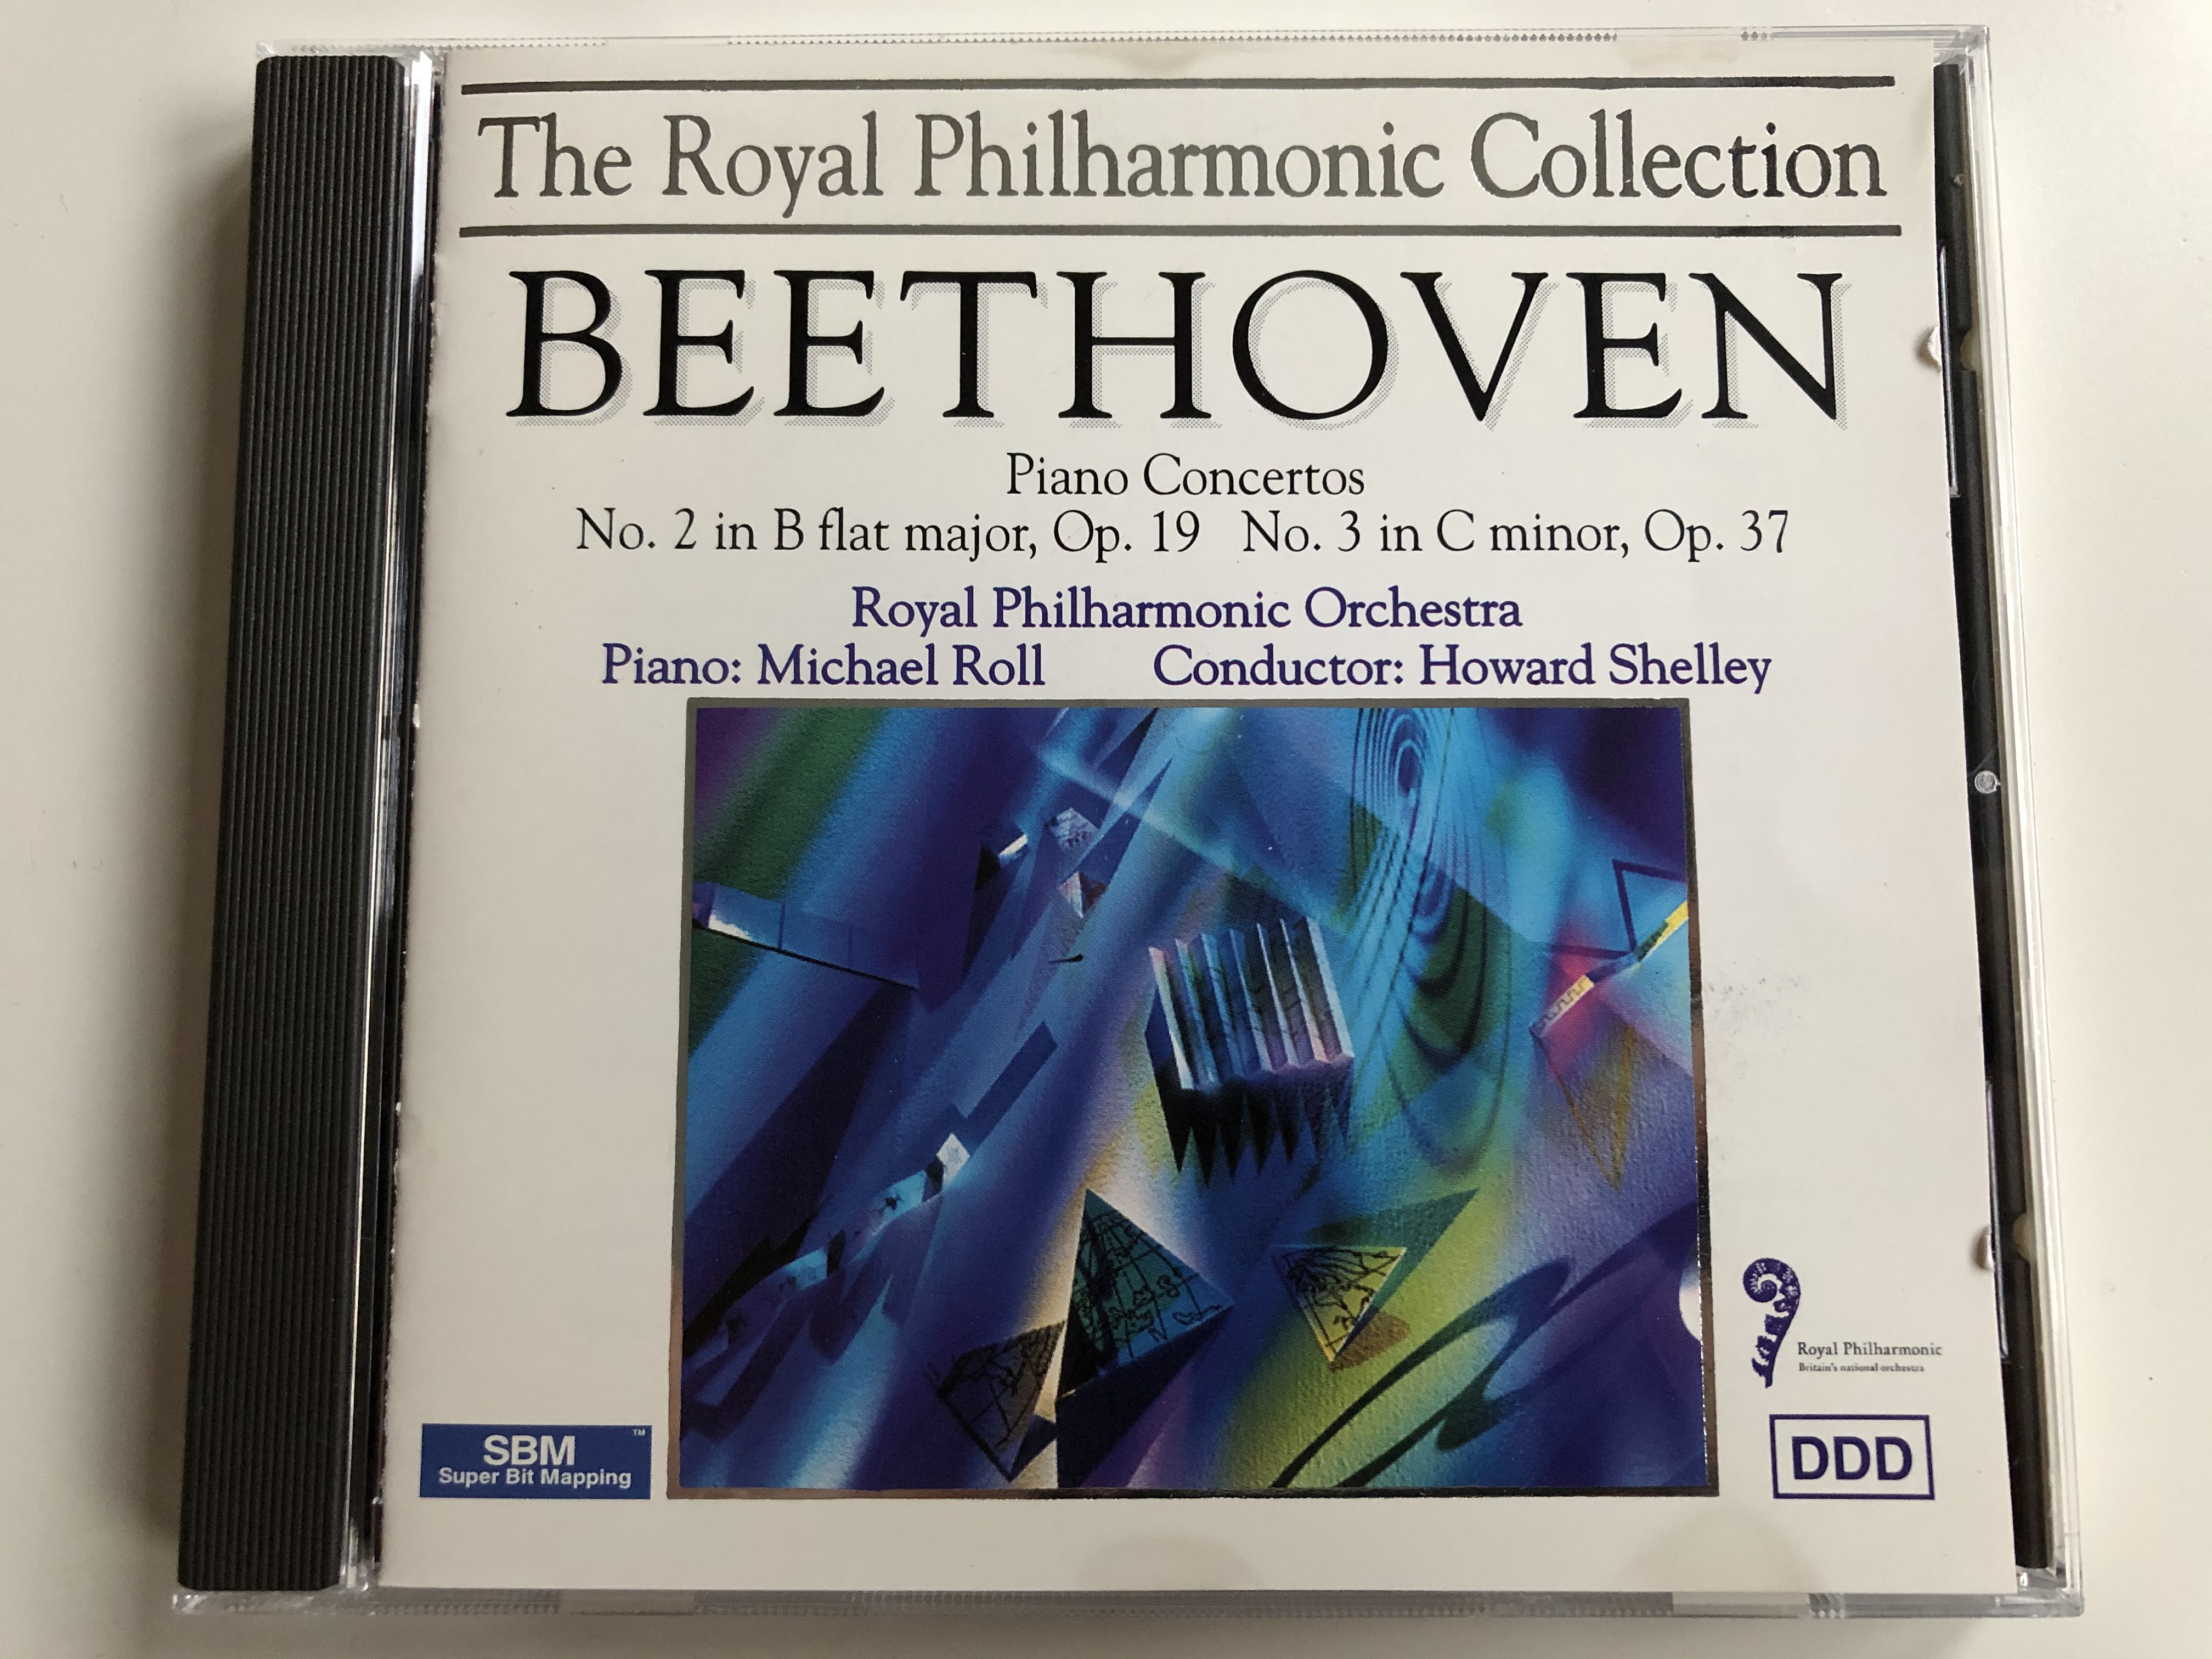 the-royal-philharmonic-collection-beethoven-piano-concertos-no.-2-in-b-flat-major-op.-19-no.-3-in-c-minor-op.-37-royal-philharmonic-orchestra-piano-michael-roll-conductor-howard-shelley-1-.jpg